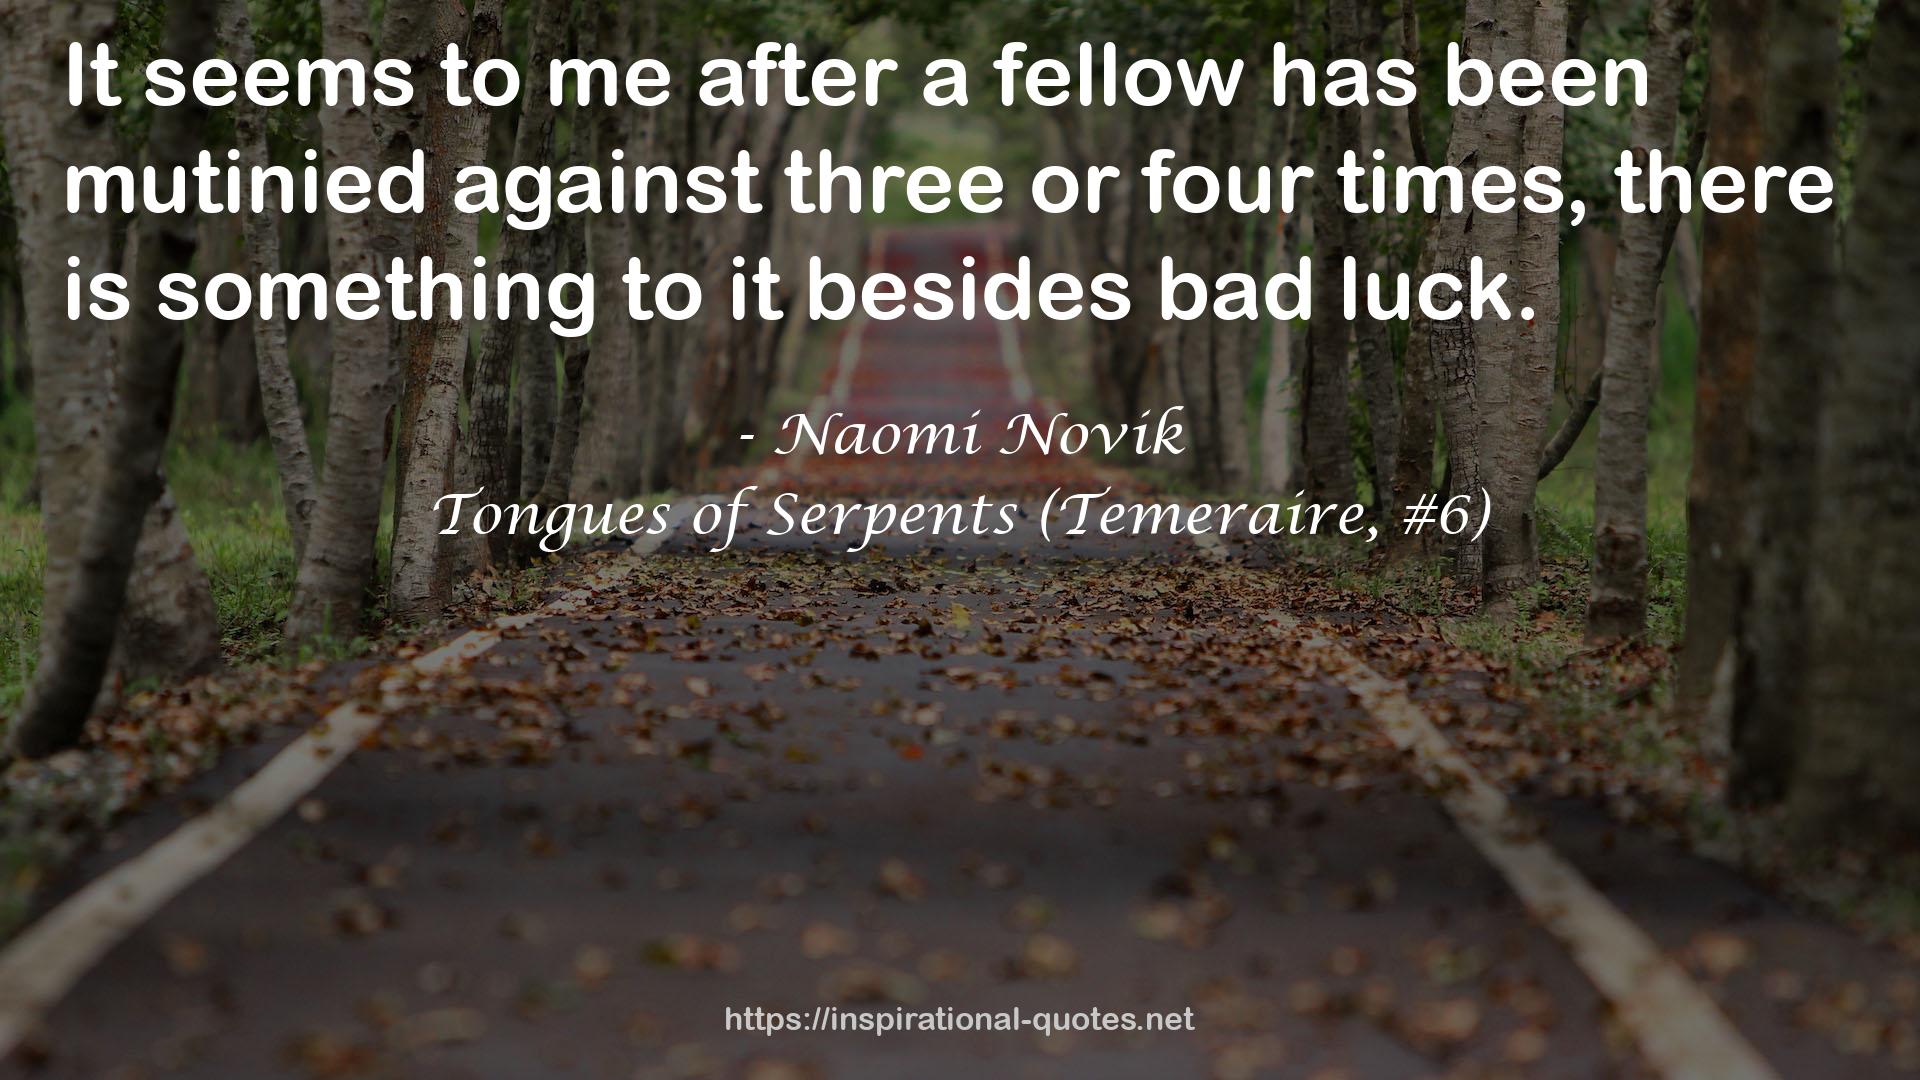 Tongues of Serpents (Temeraire, #6) QUOTES